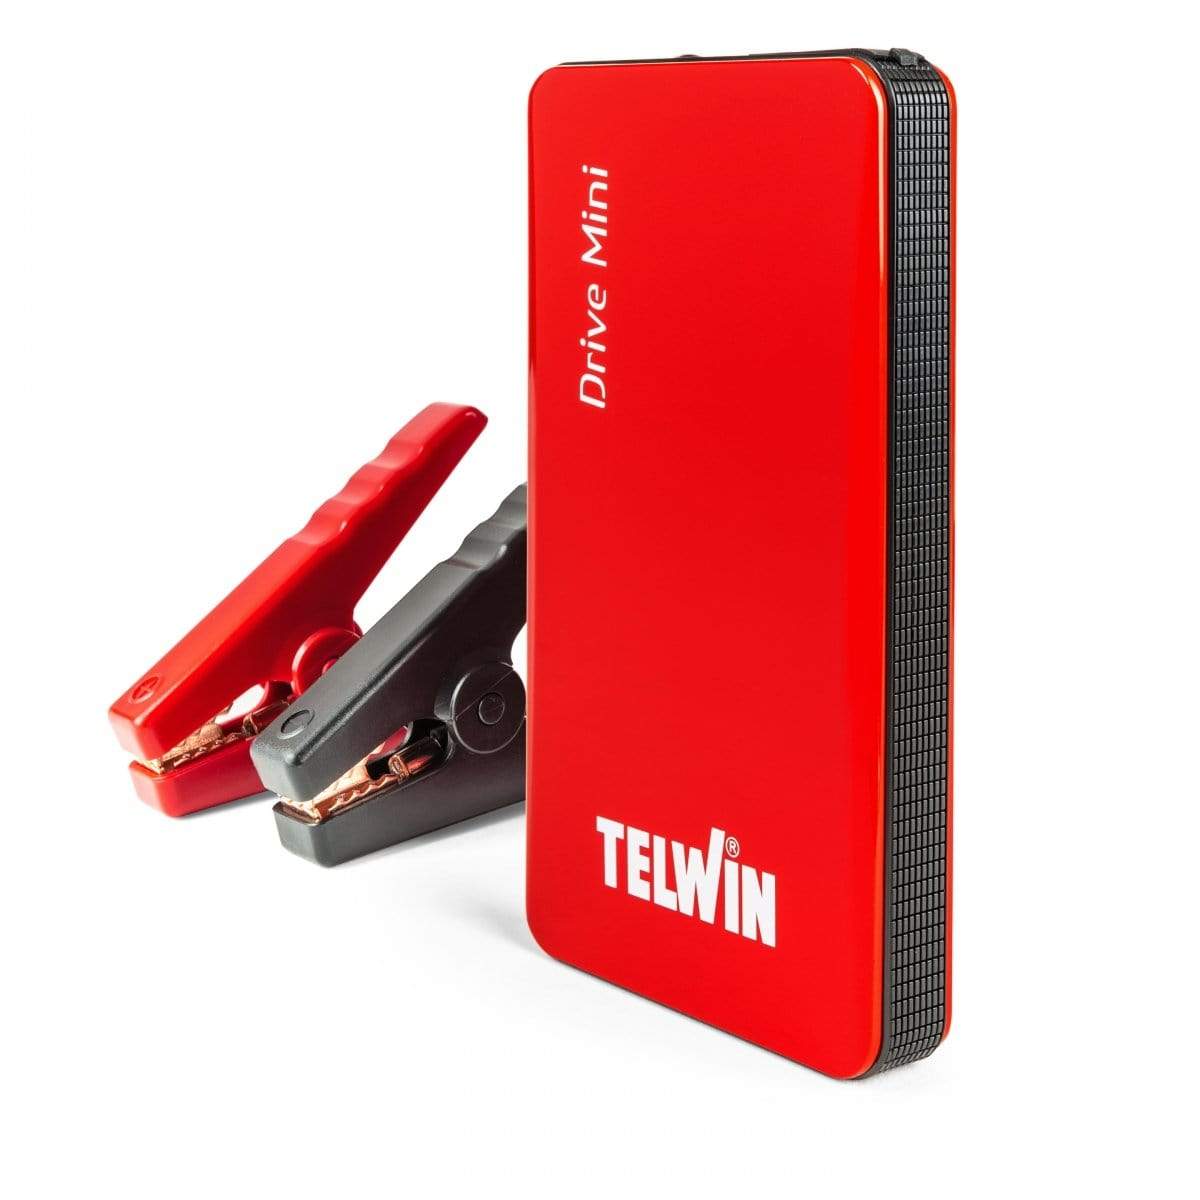 Telwin Battery Charger 12V - DRIVE MINI | Supply Master | Accra, Ghana Tools Building Steel Engineering Hardware tool